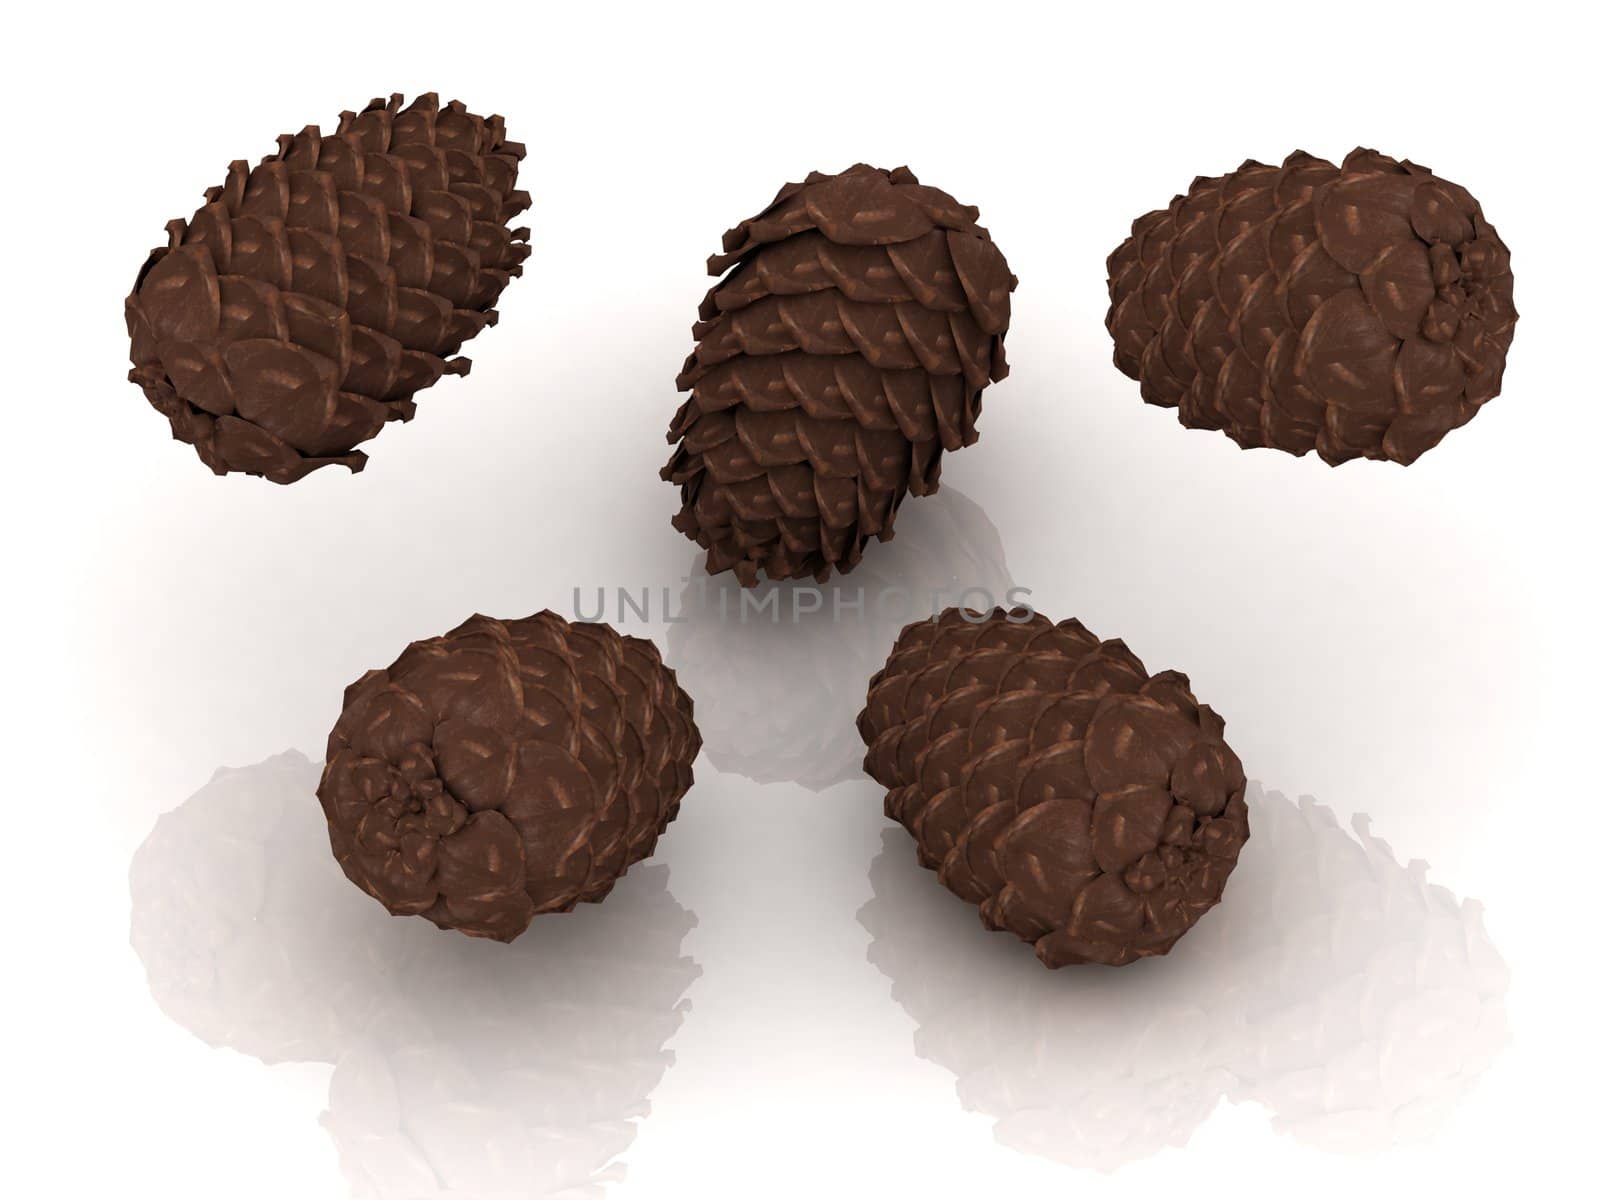 Pine cones thrown up into the air on an isolated white background